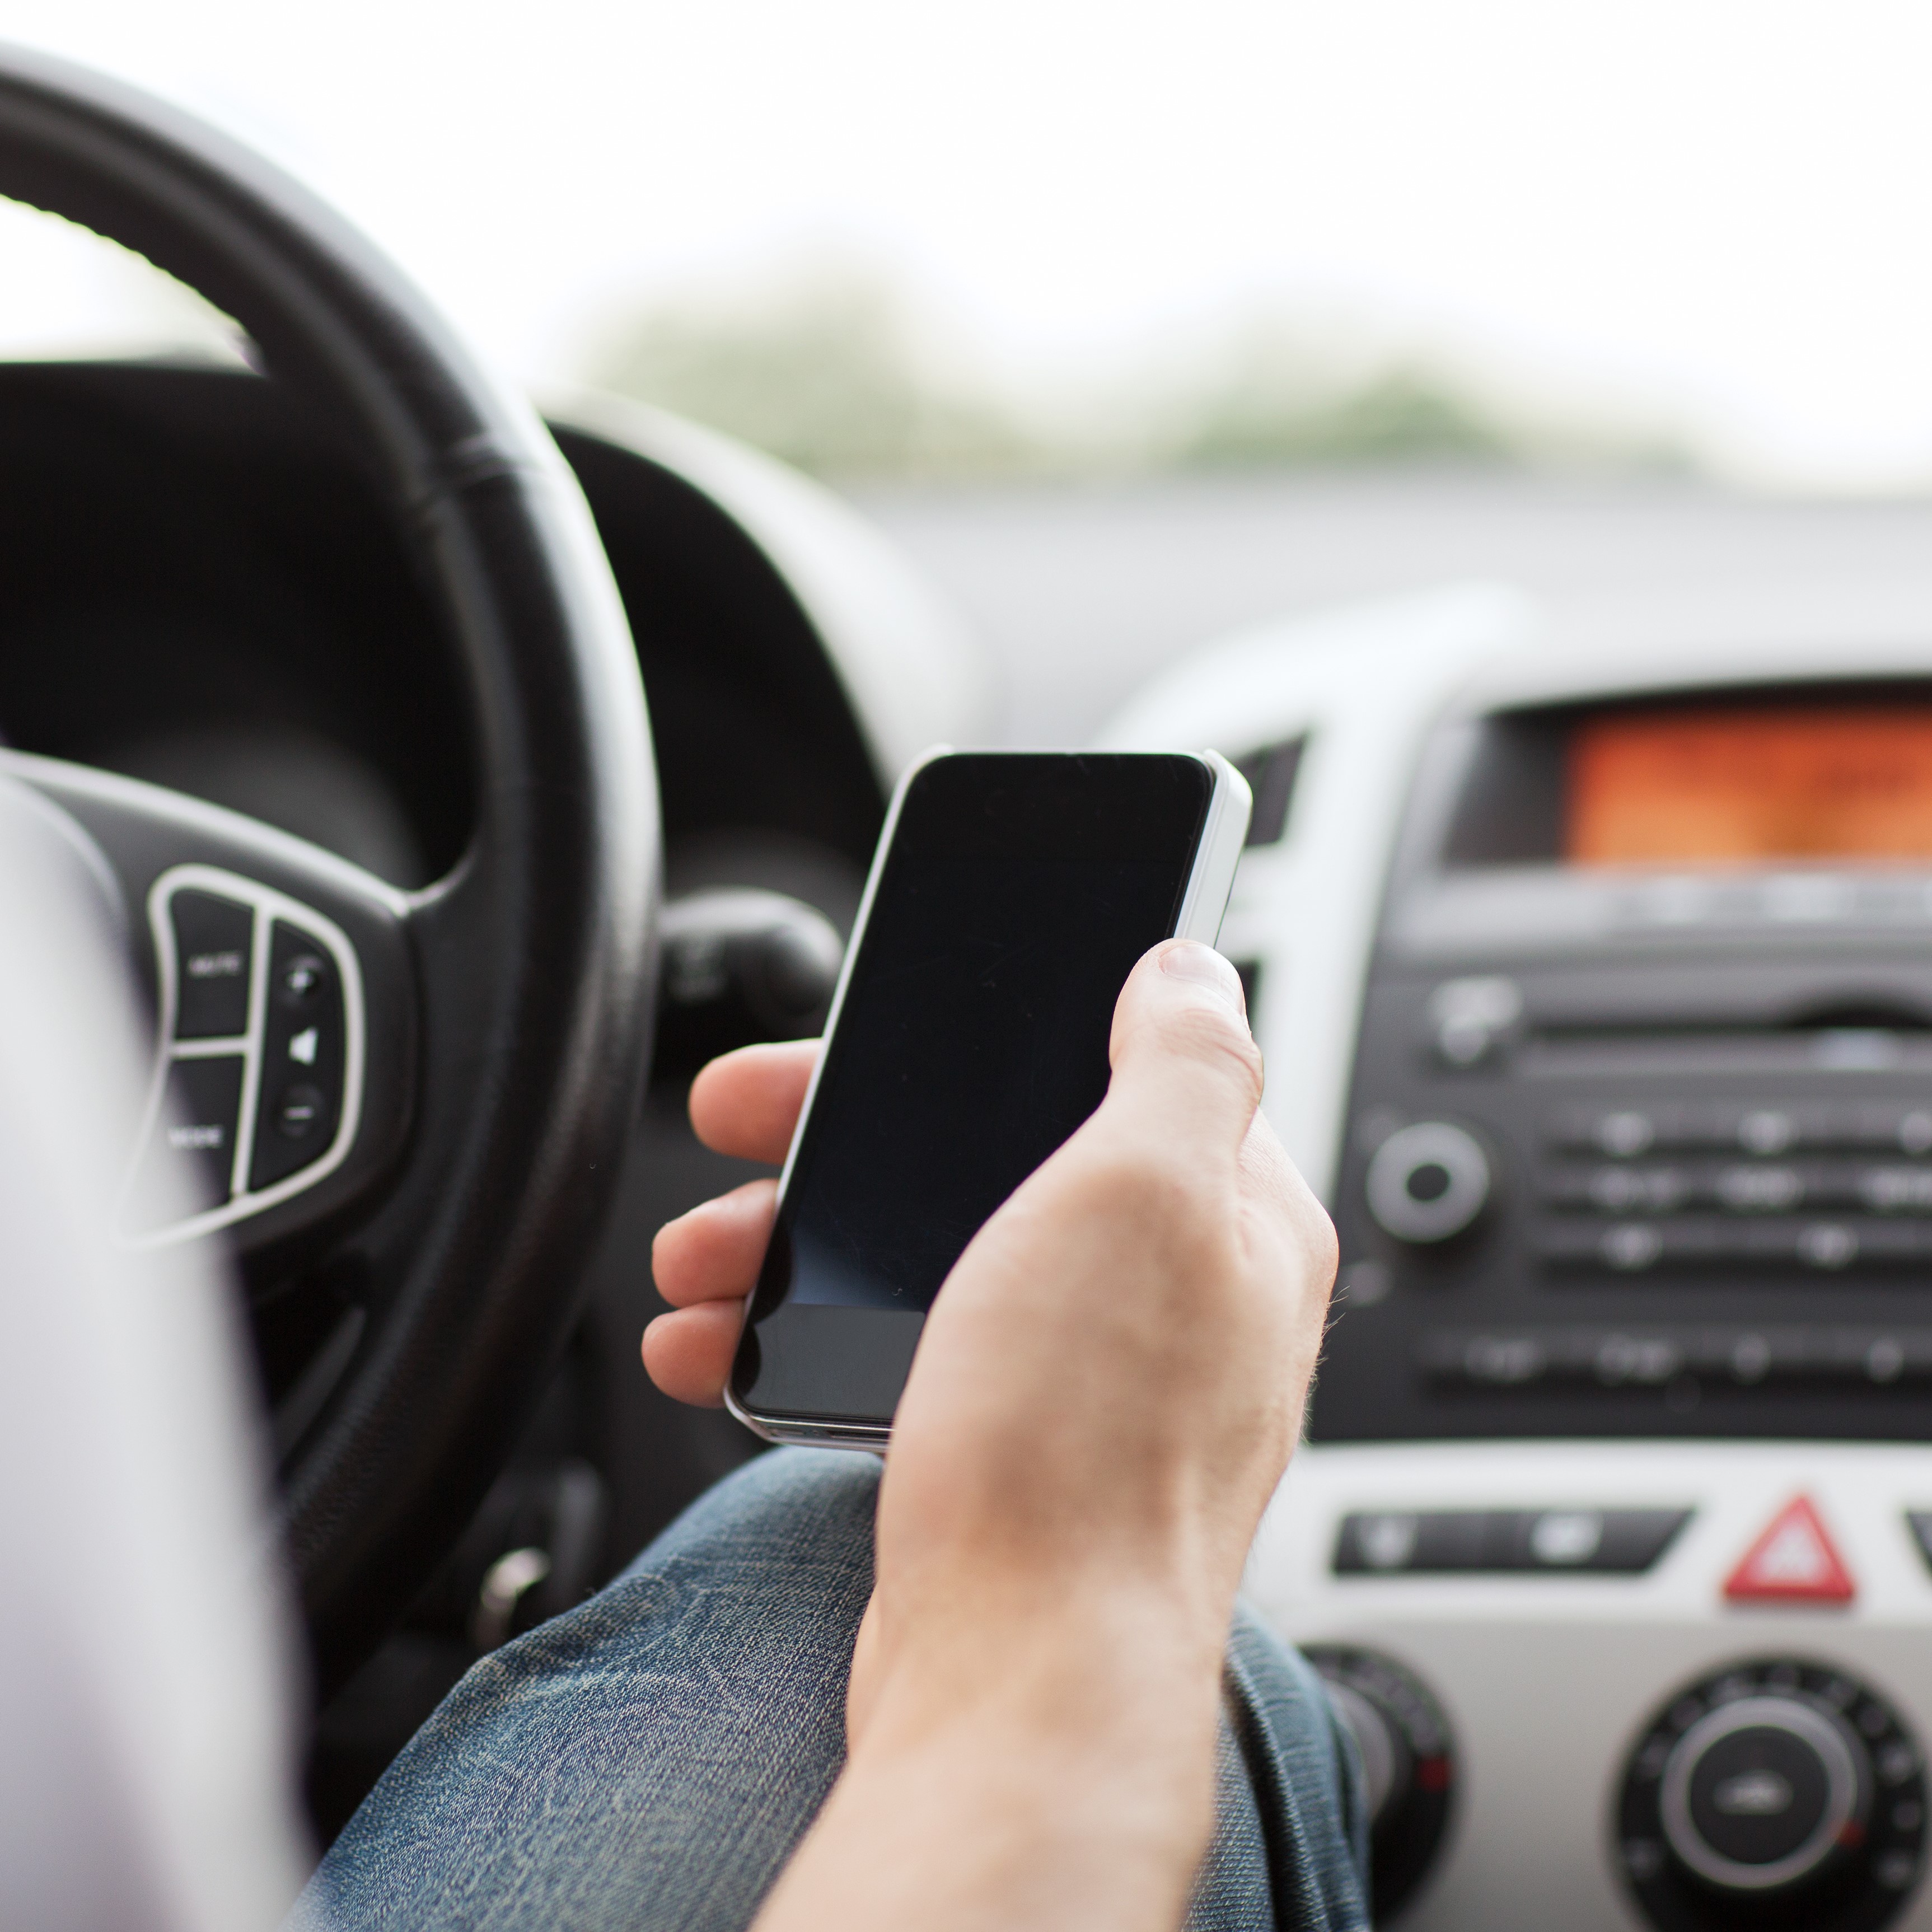 AAA shares tips to keep drivers focused on the road during Distracted Driving Awareness Month